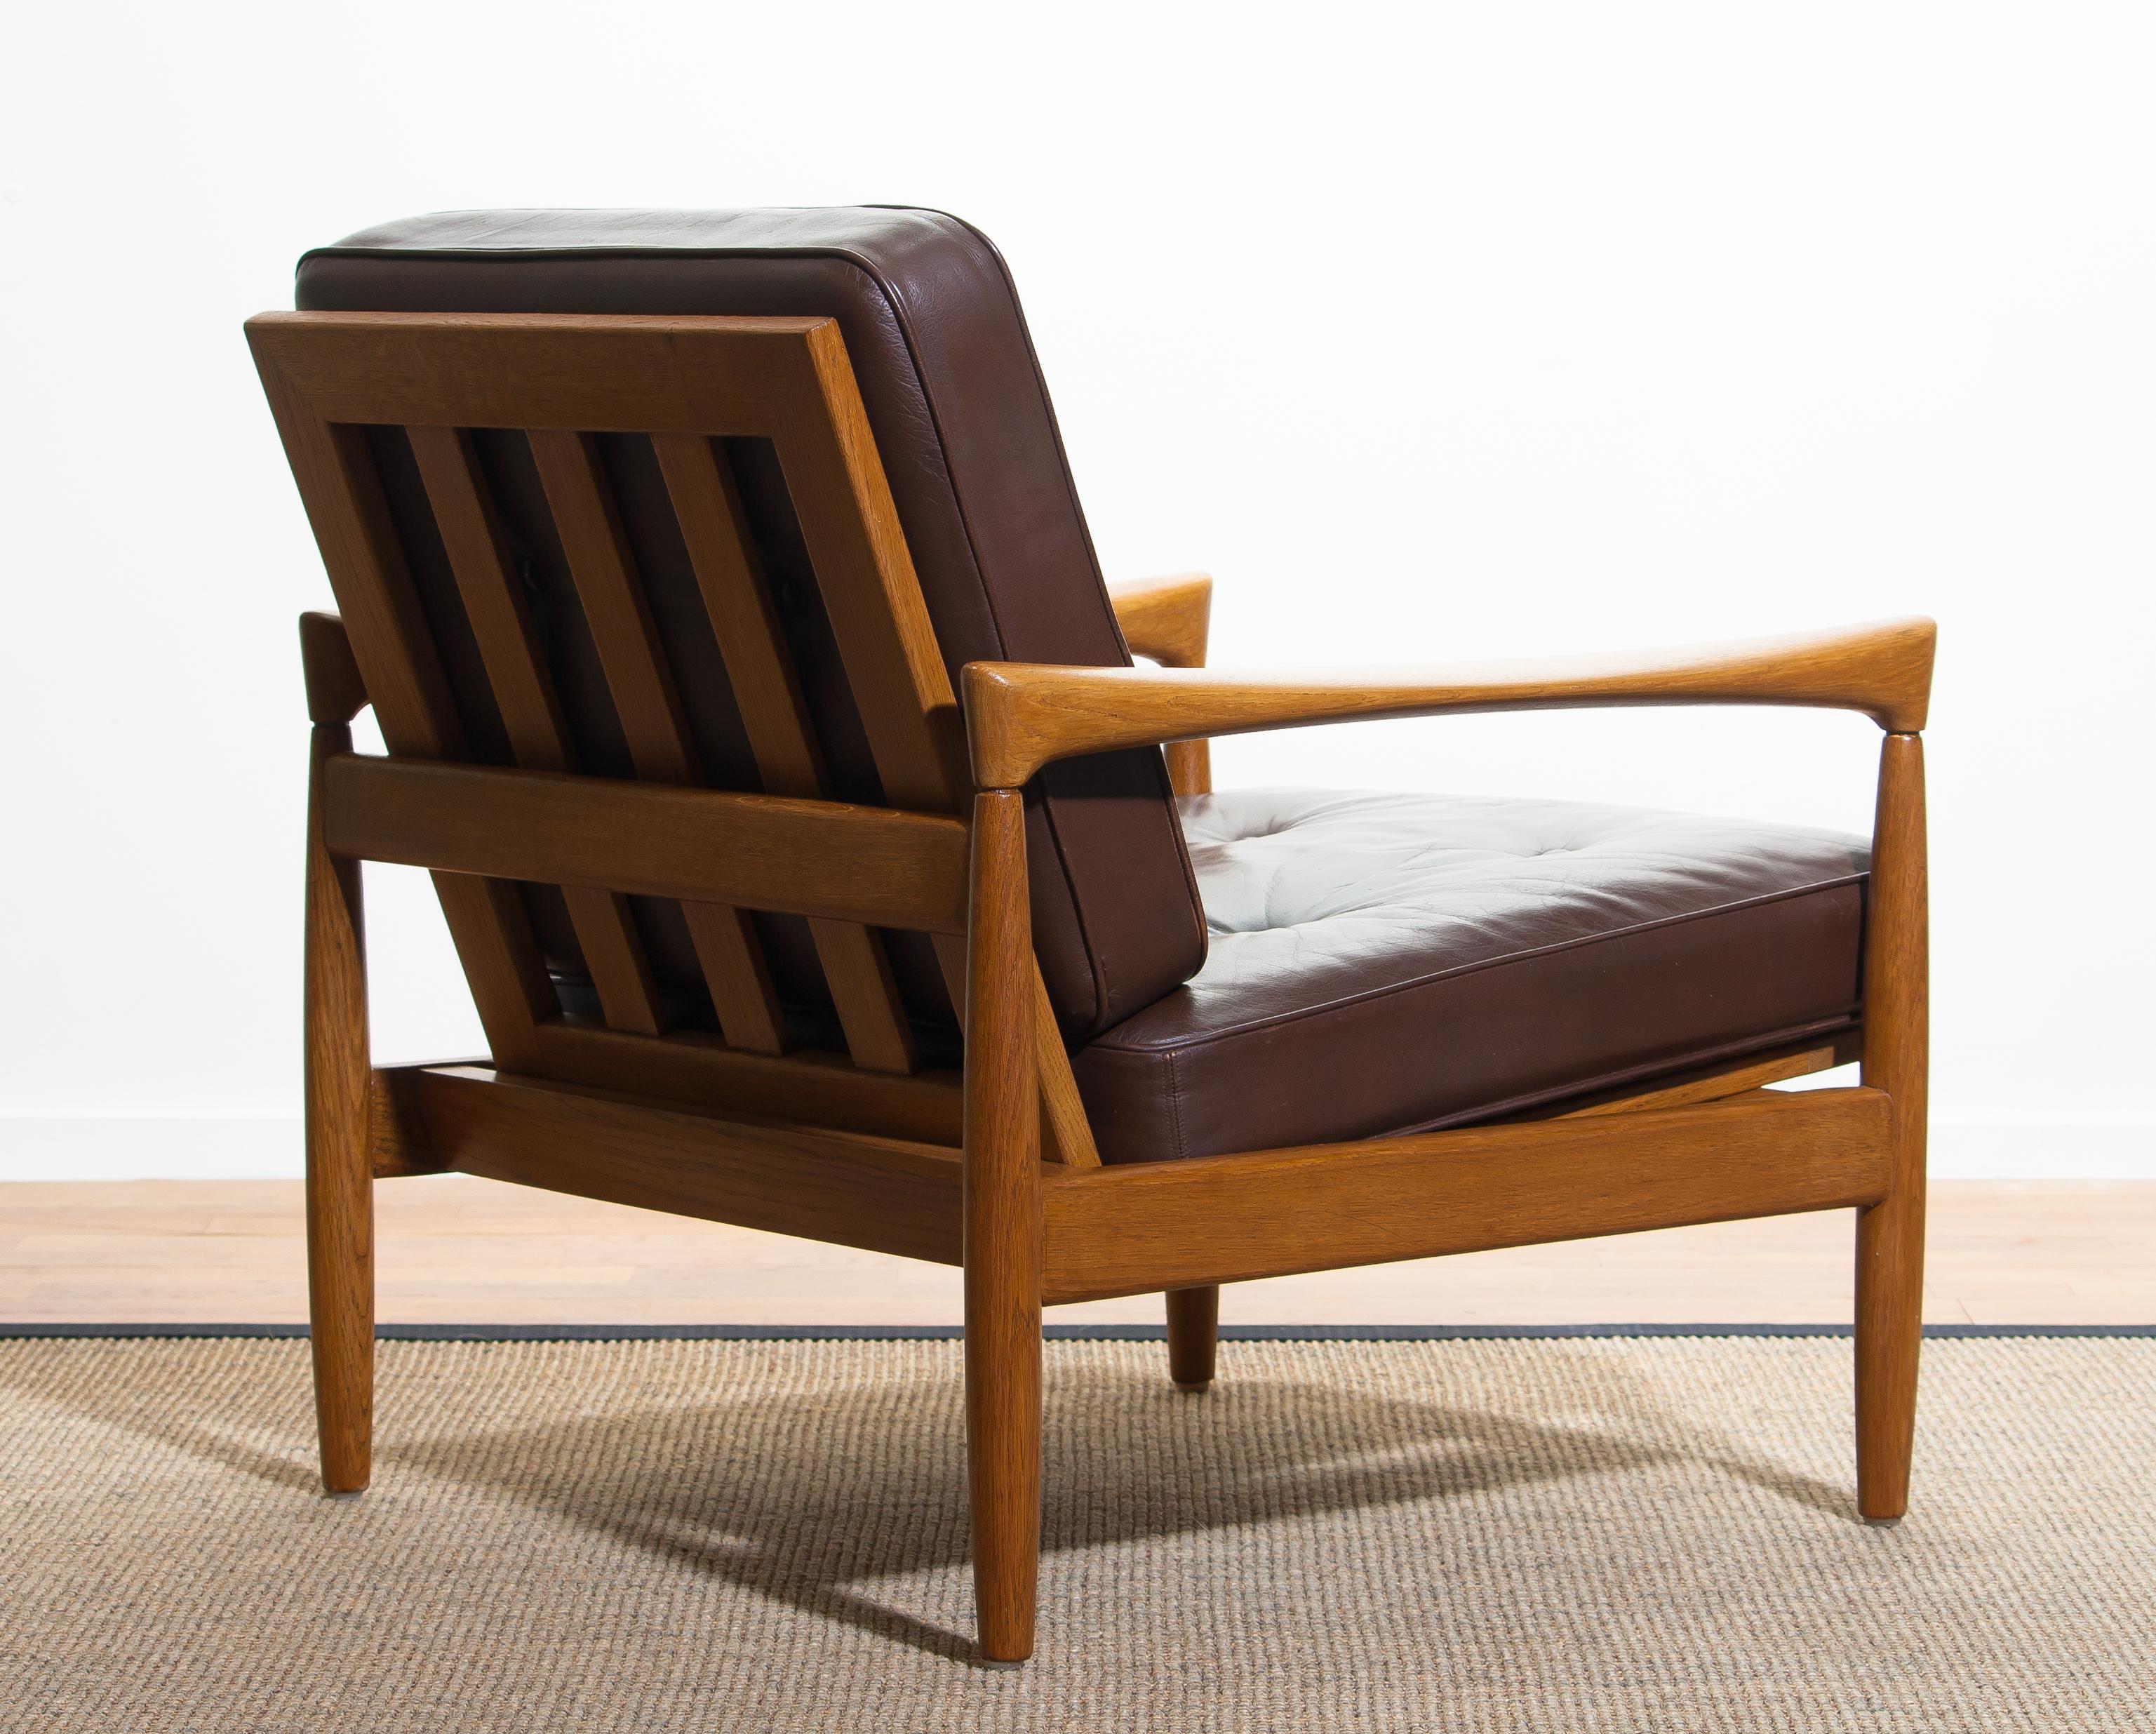 Mid-Century Modern 1960s, Oak with Brown Leather Lounge Chair by Erik Wörtz for Bröderna Anderssons